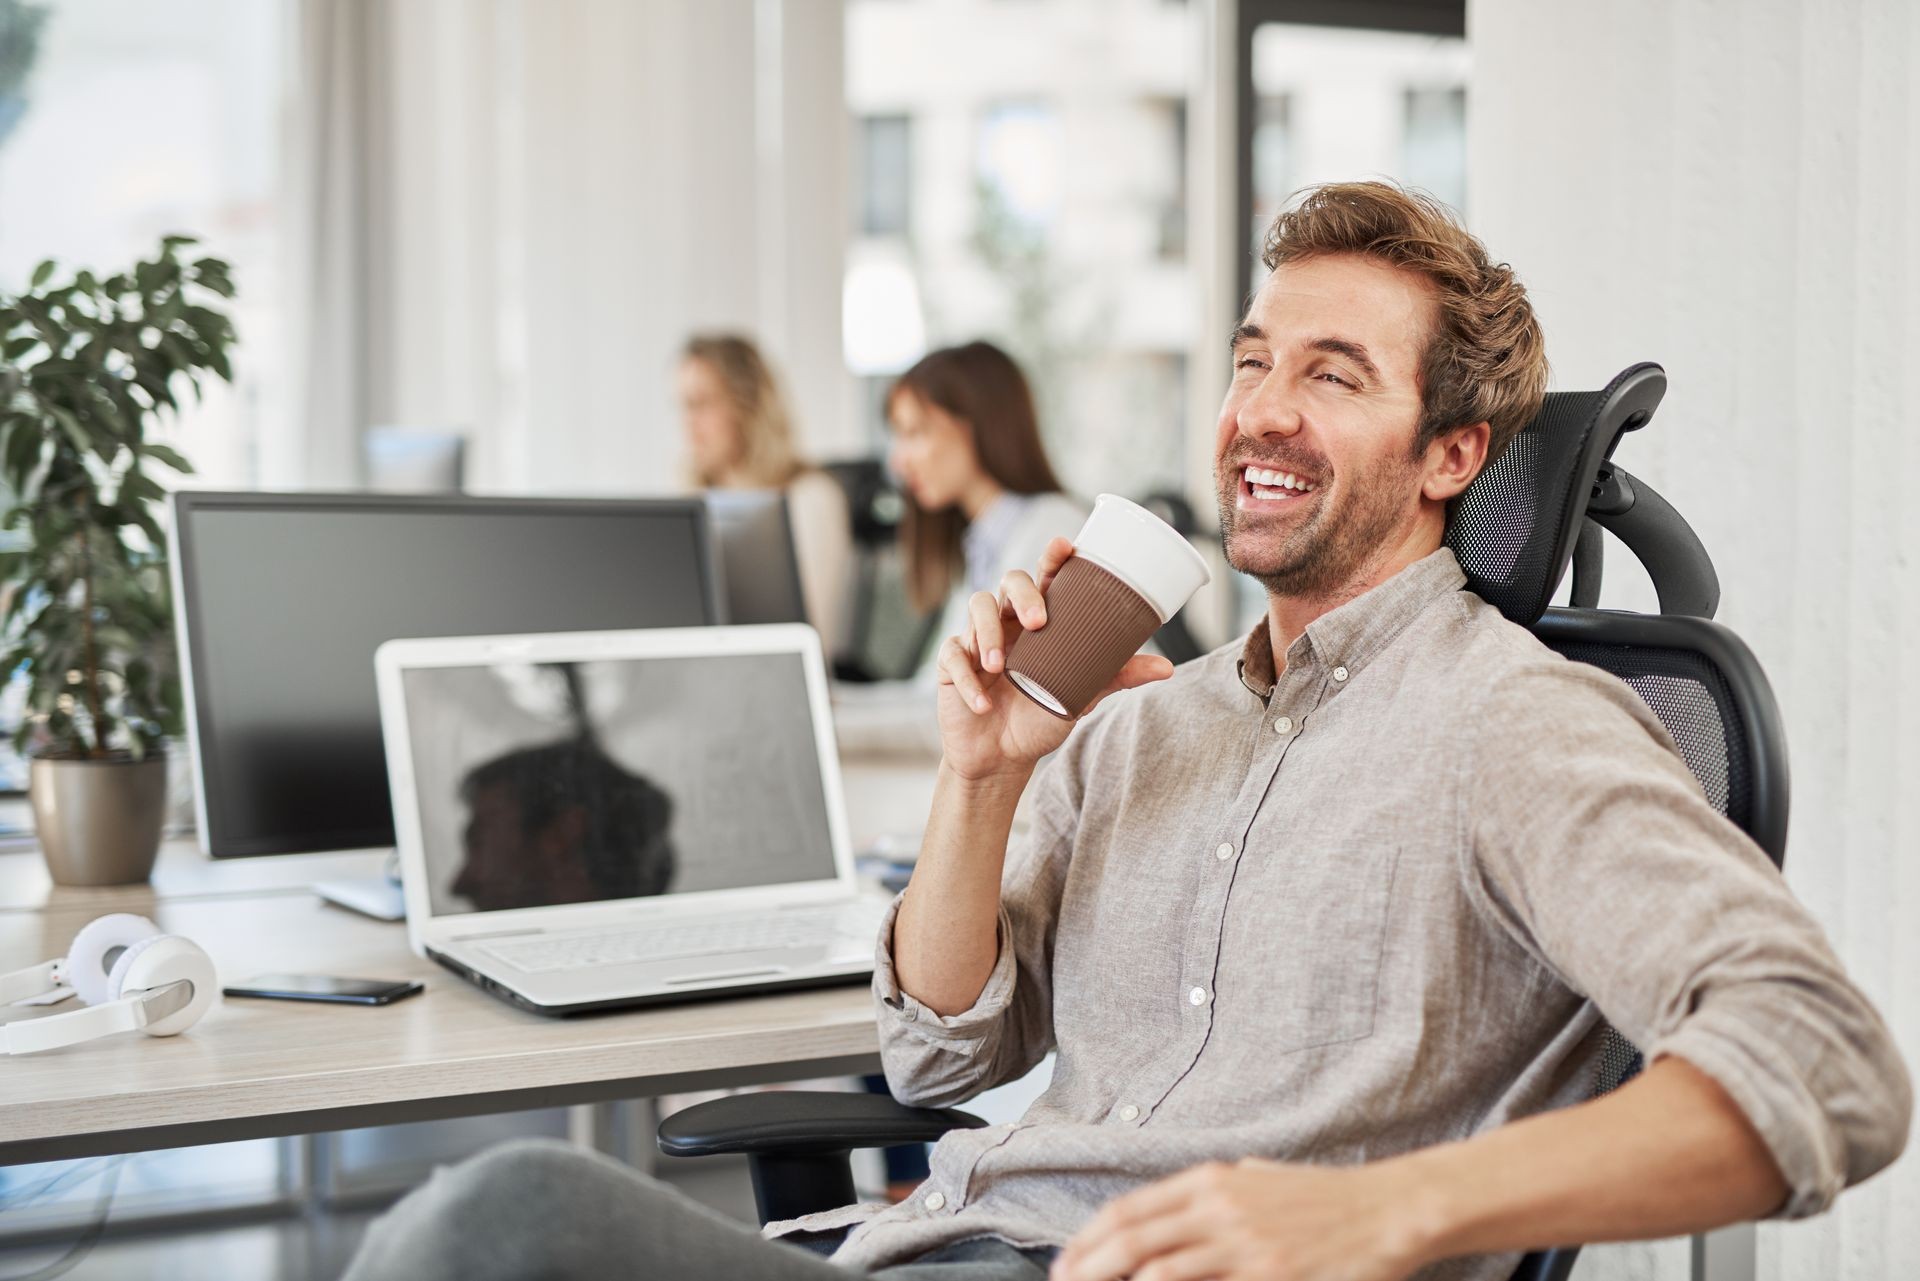 Smiling successful CEO talking to employee and drinking coffee to go while sitting in chair in office. In background workers ar their working stations.